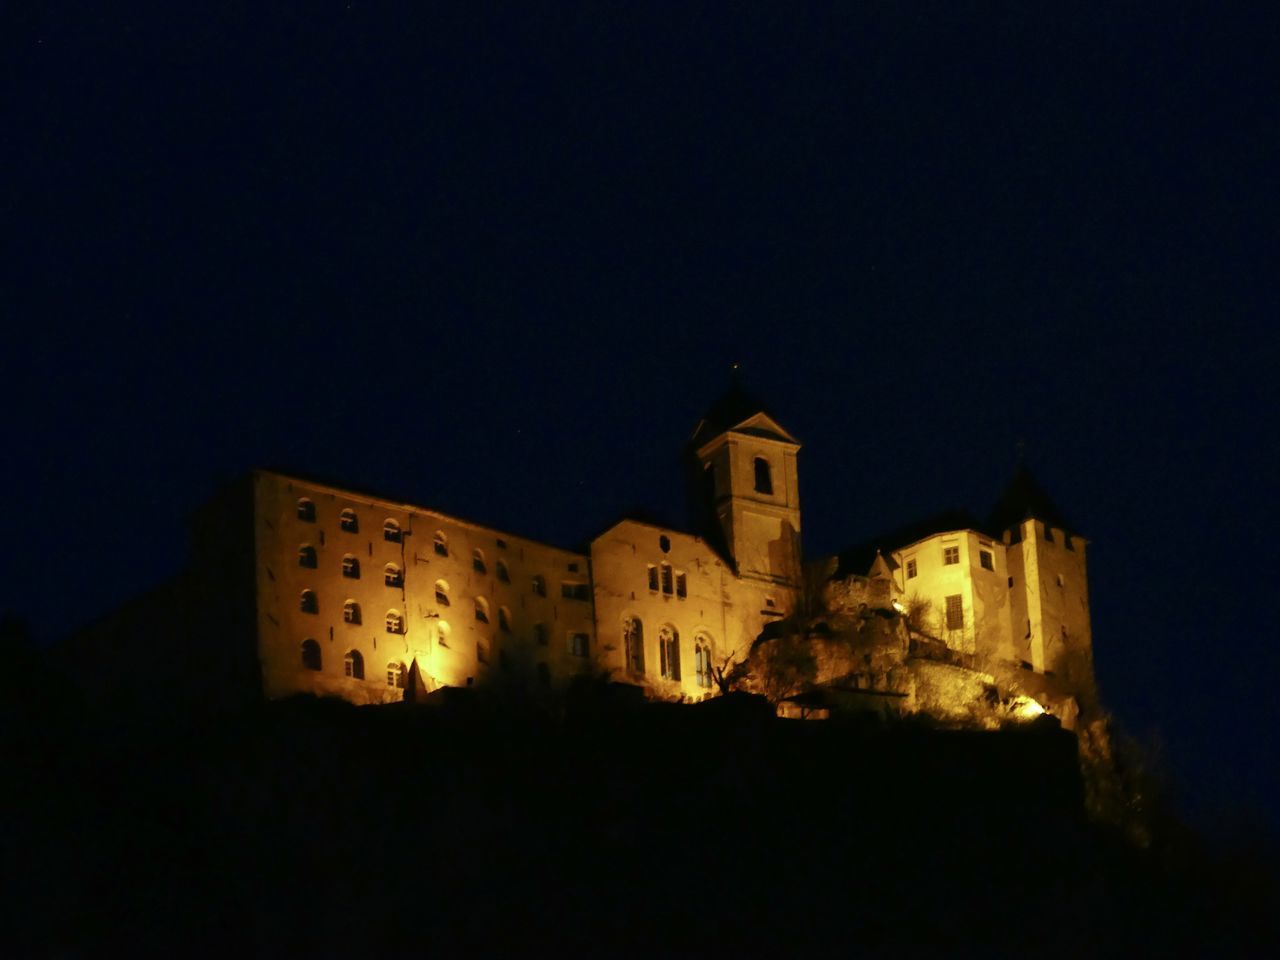 LOW ANGLE VIEW OF ILLUMINATED HISTORIC BUILDING AGAINST SKY AT NIGHT